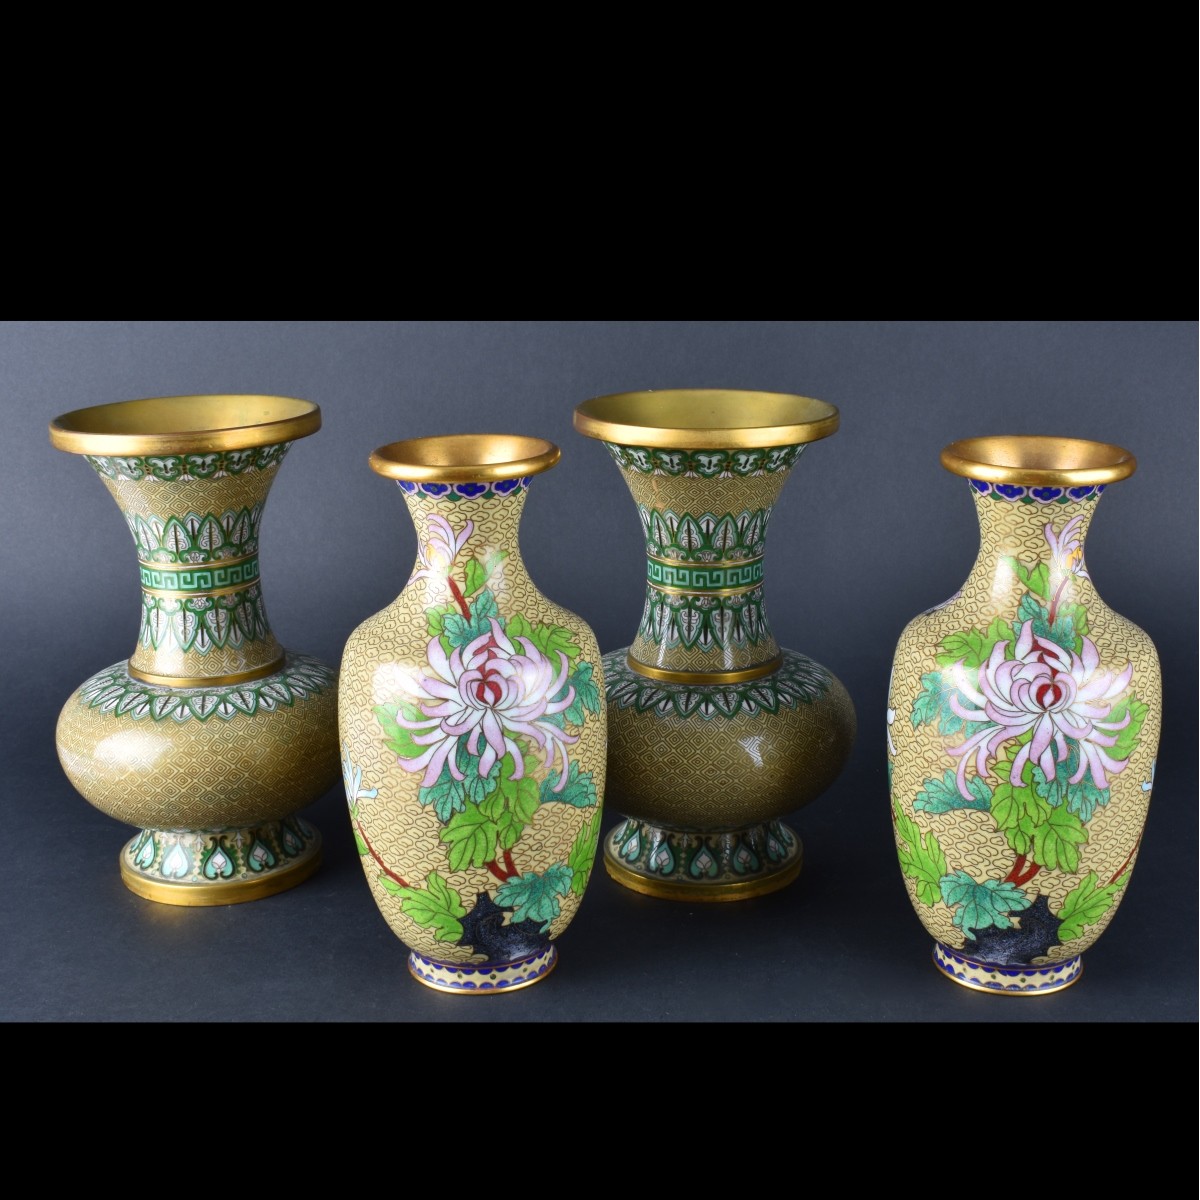 Four Chinese Cloisonne Vases